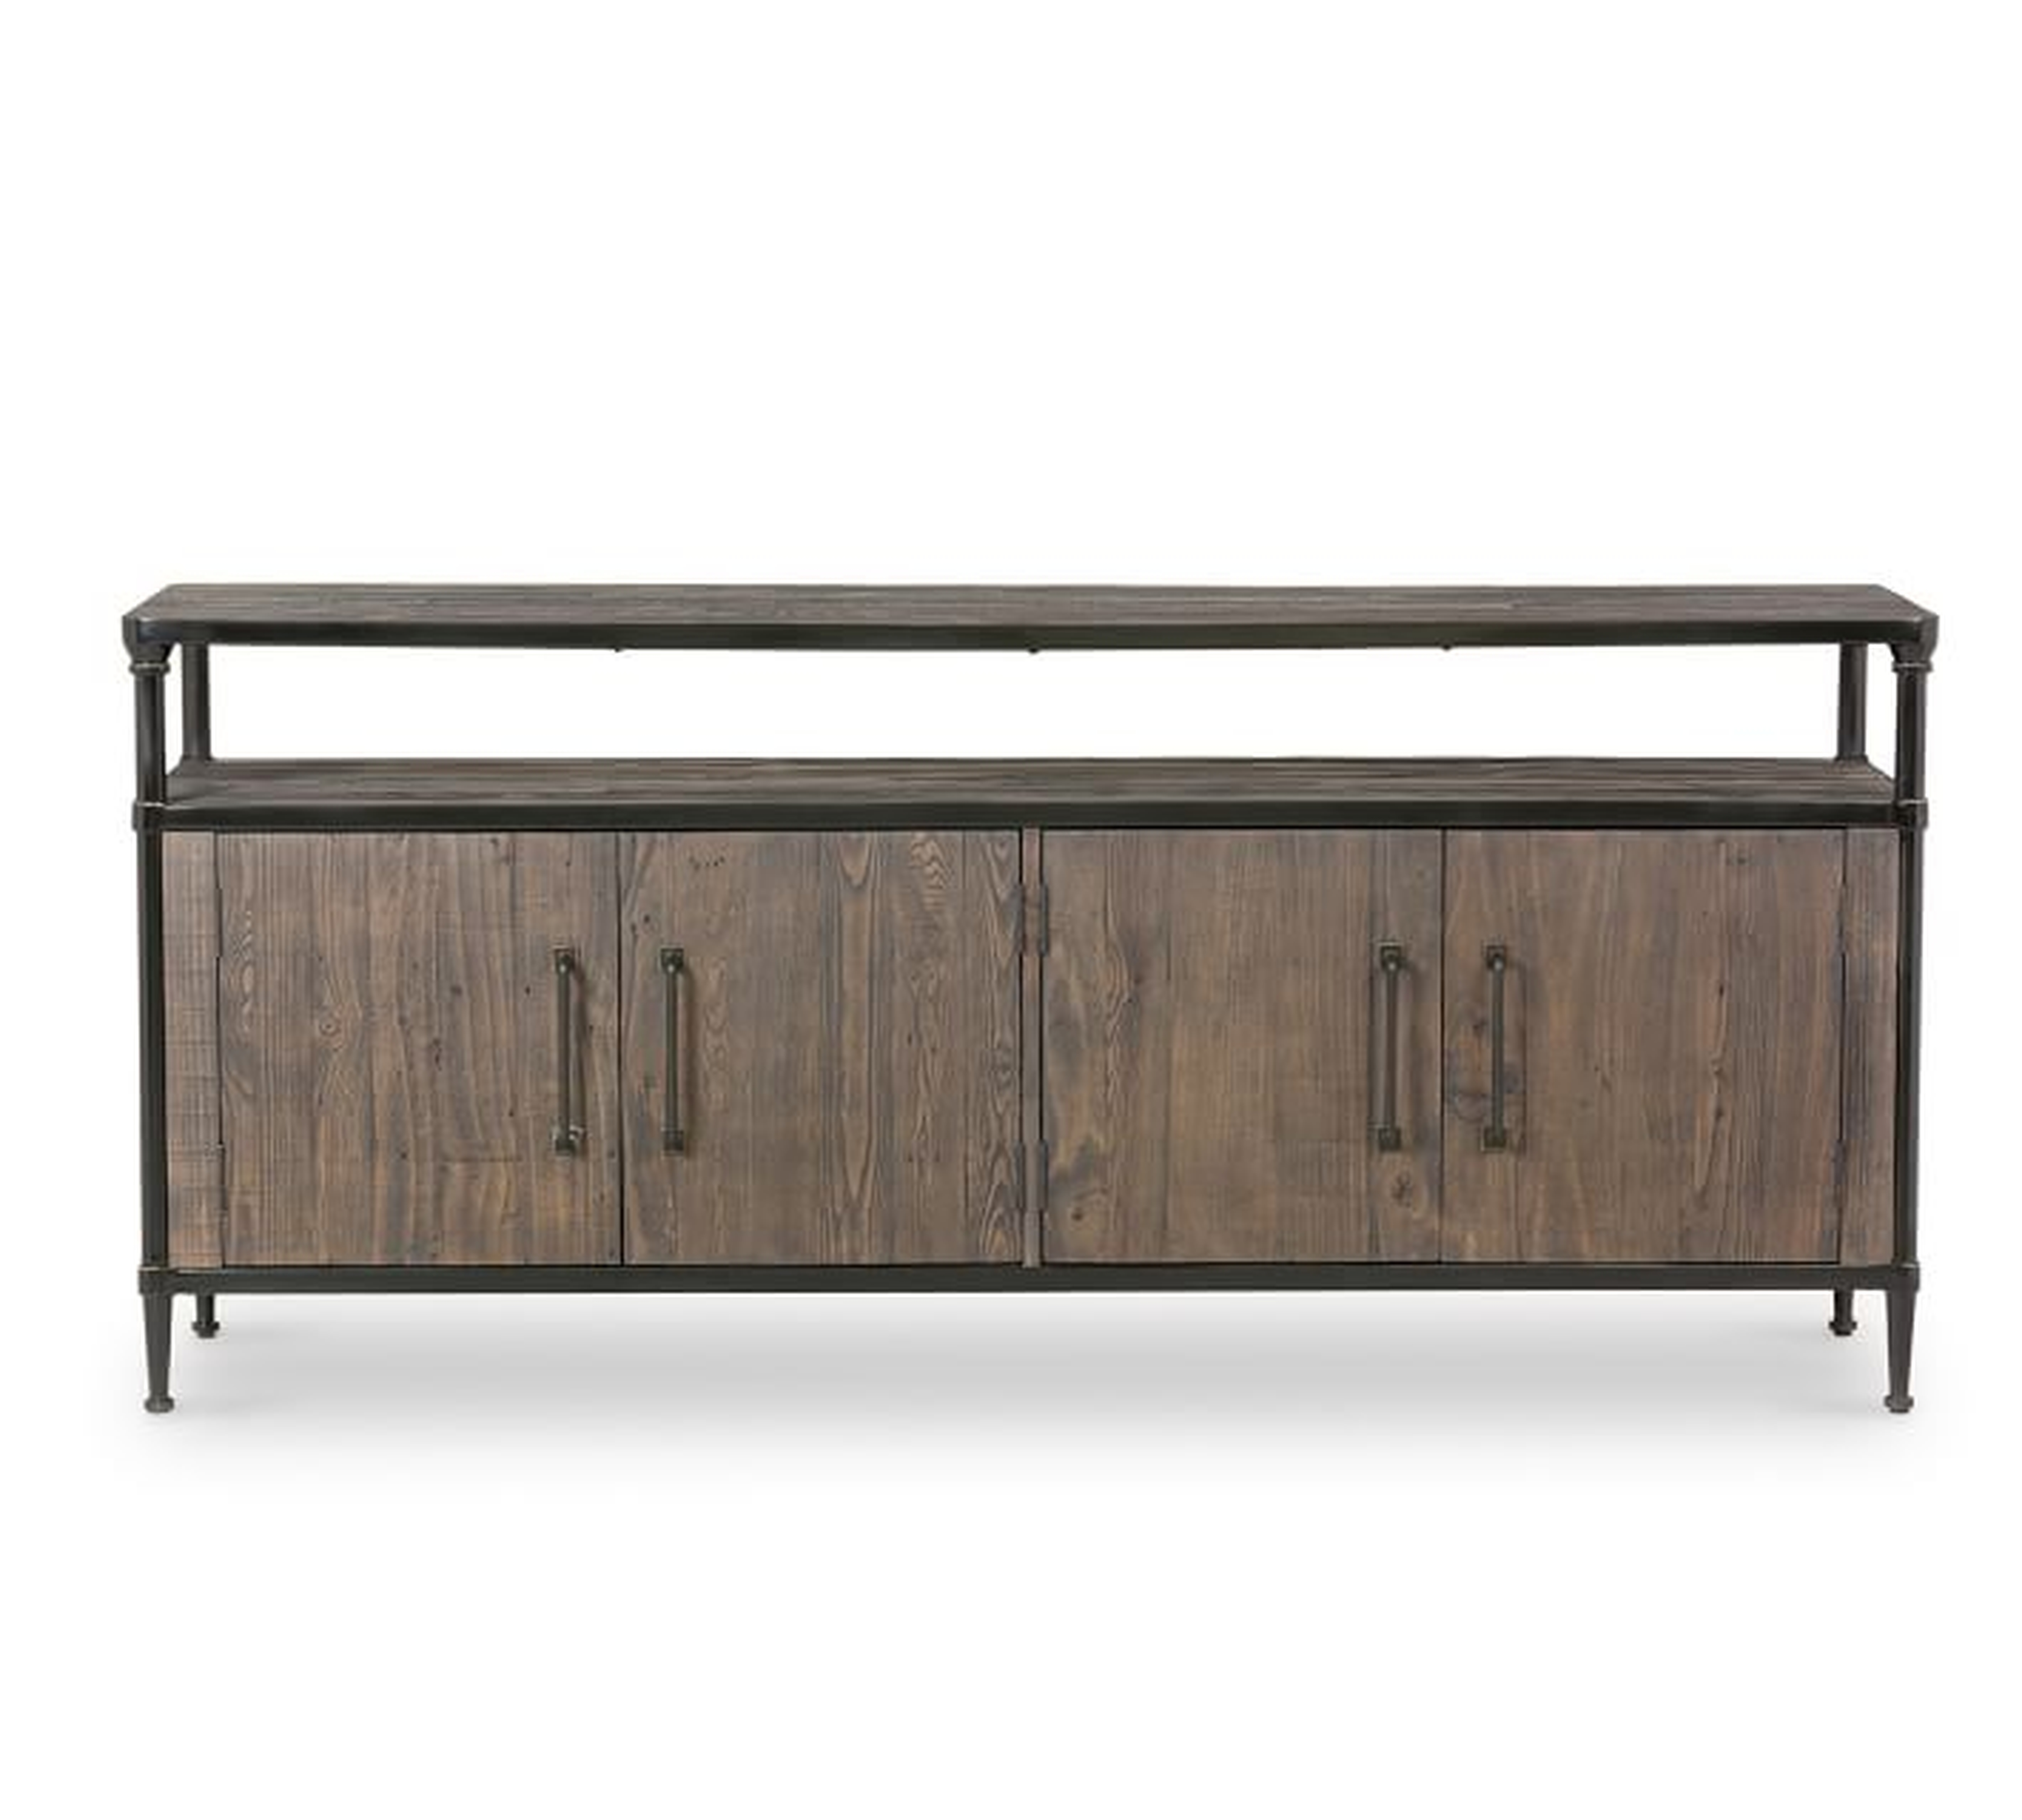 Juno Media Console, Large, Carbon - Pottery Barn